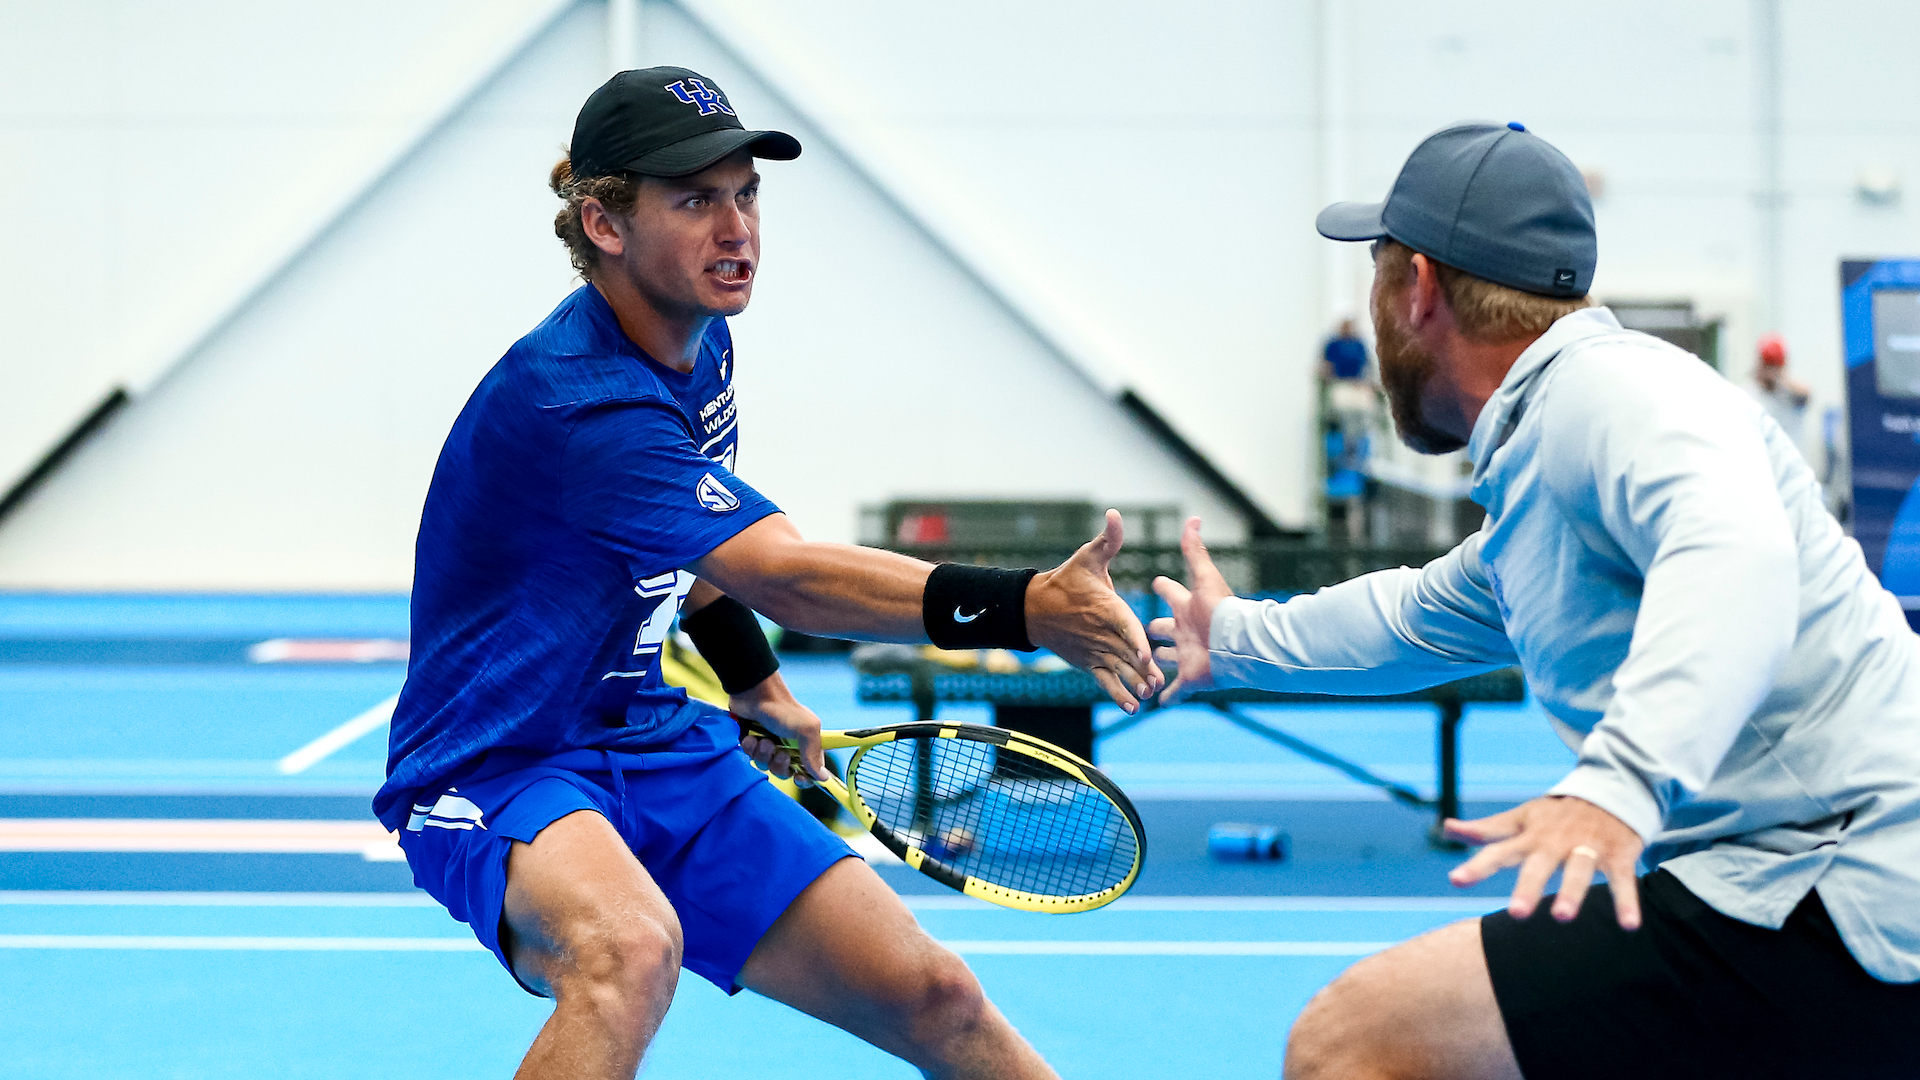 Wildcats Dominate in Singles to Advance to First-Ever NCAA Championship